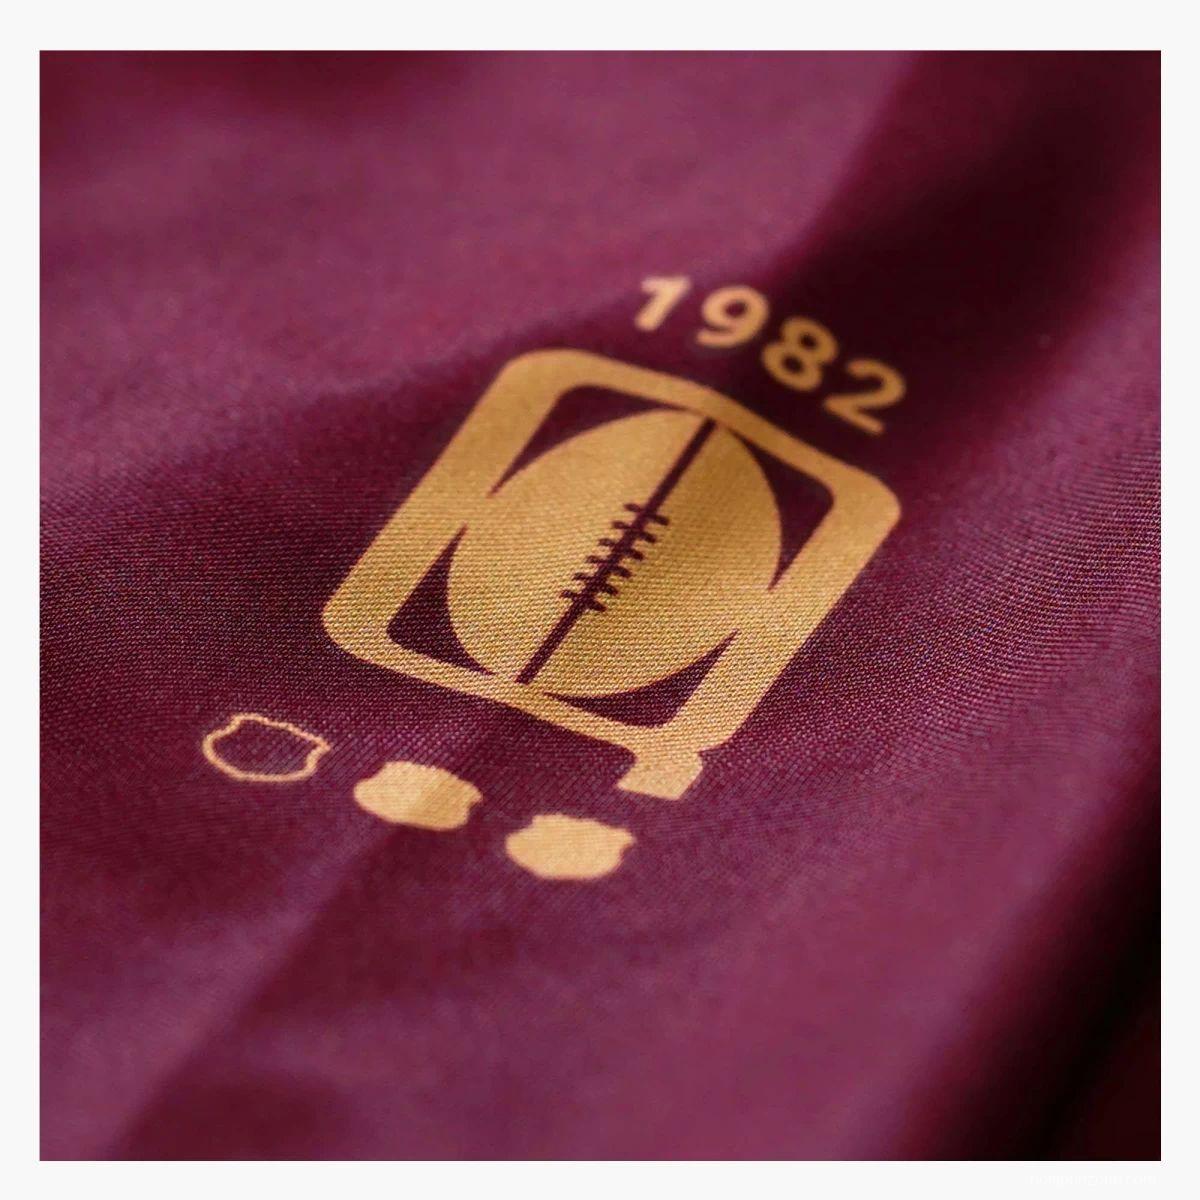 Kids QLD Maroons 2022 Home Rugby Kit